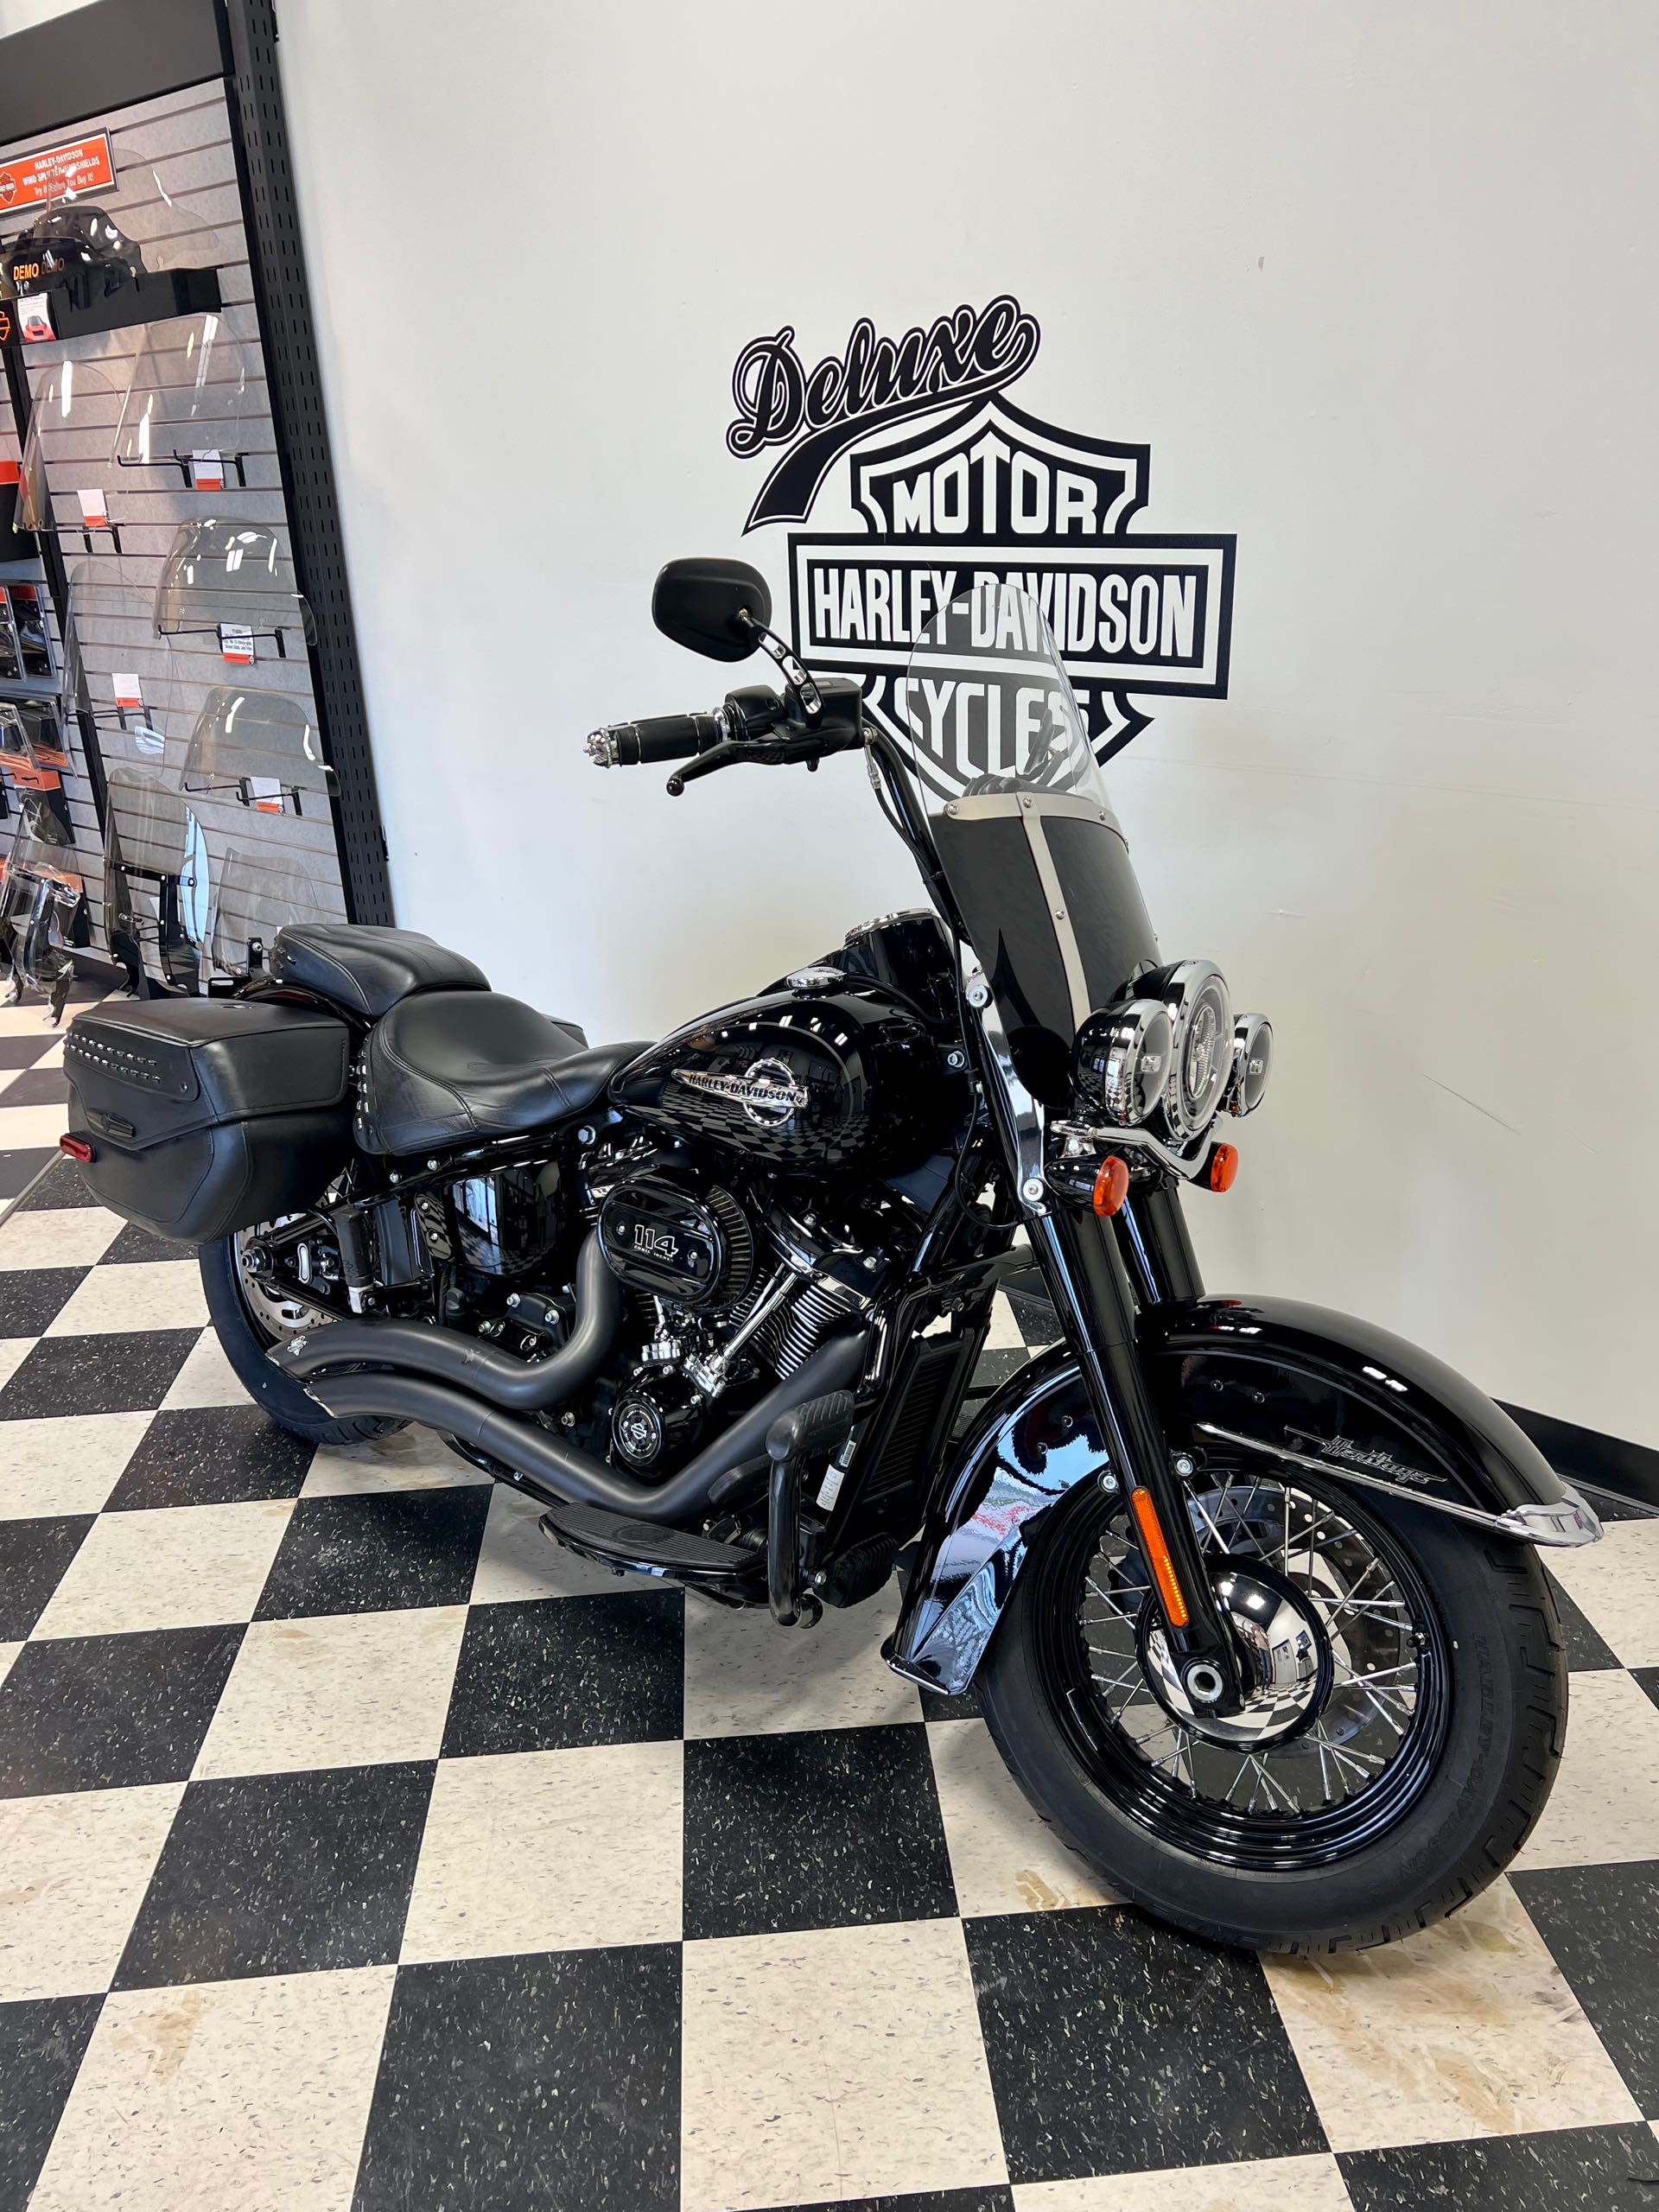 2019 Harley-Davidson Softail Heritage Classic 114 at Deluxe Harley Davidson